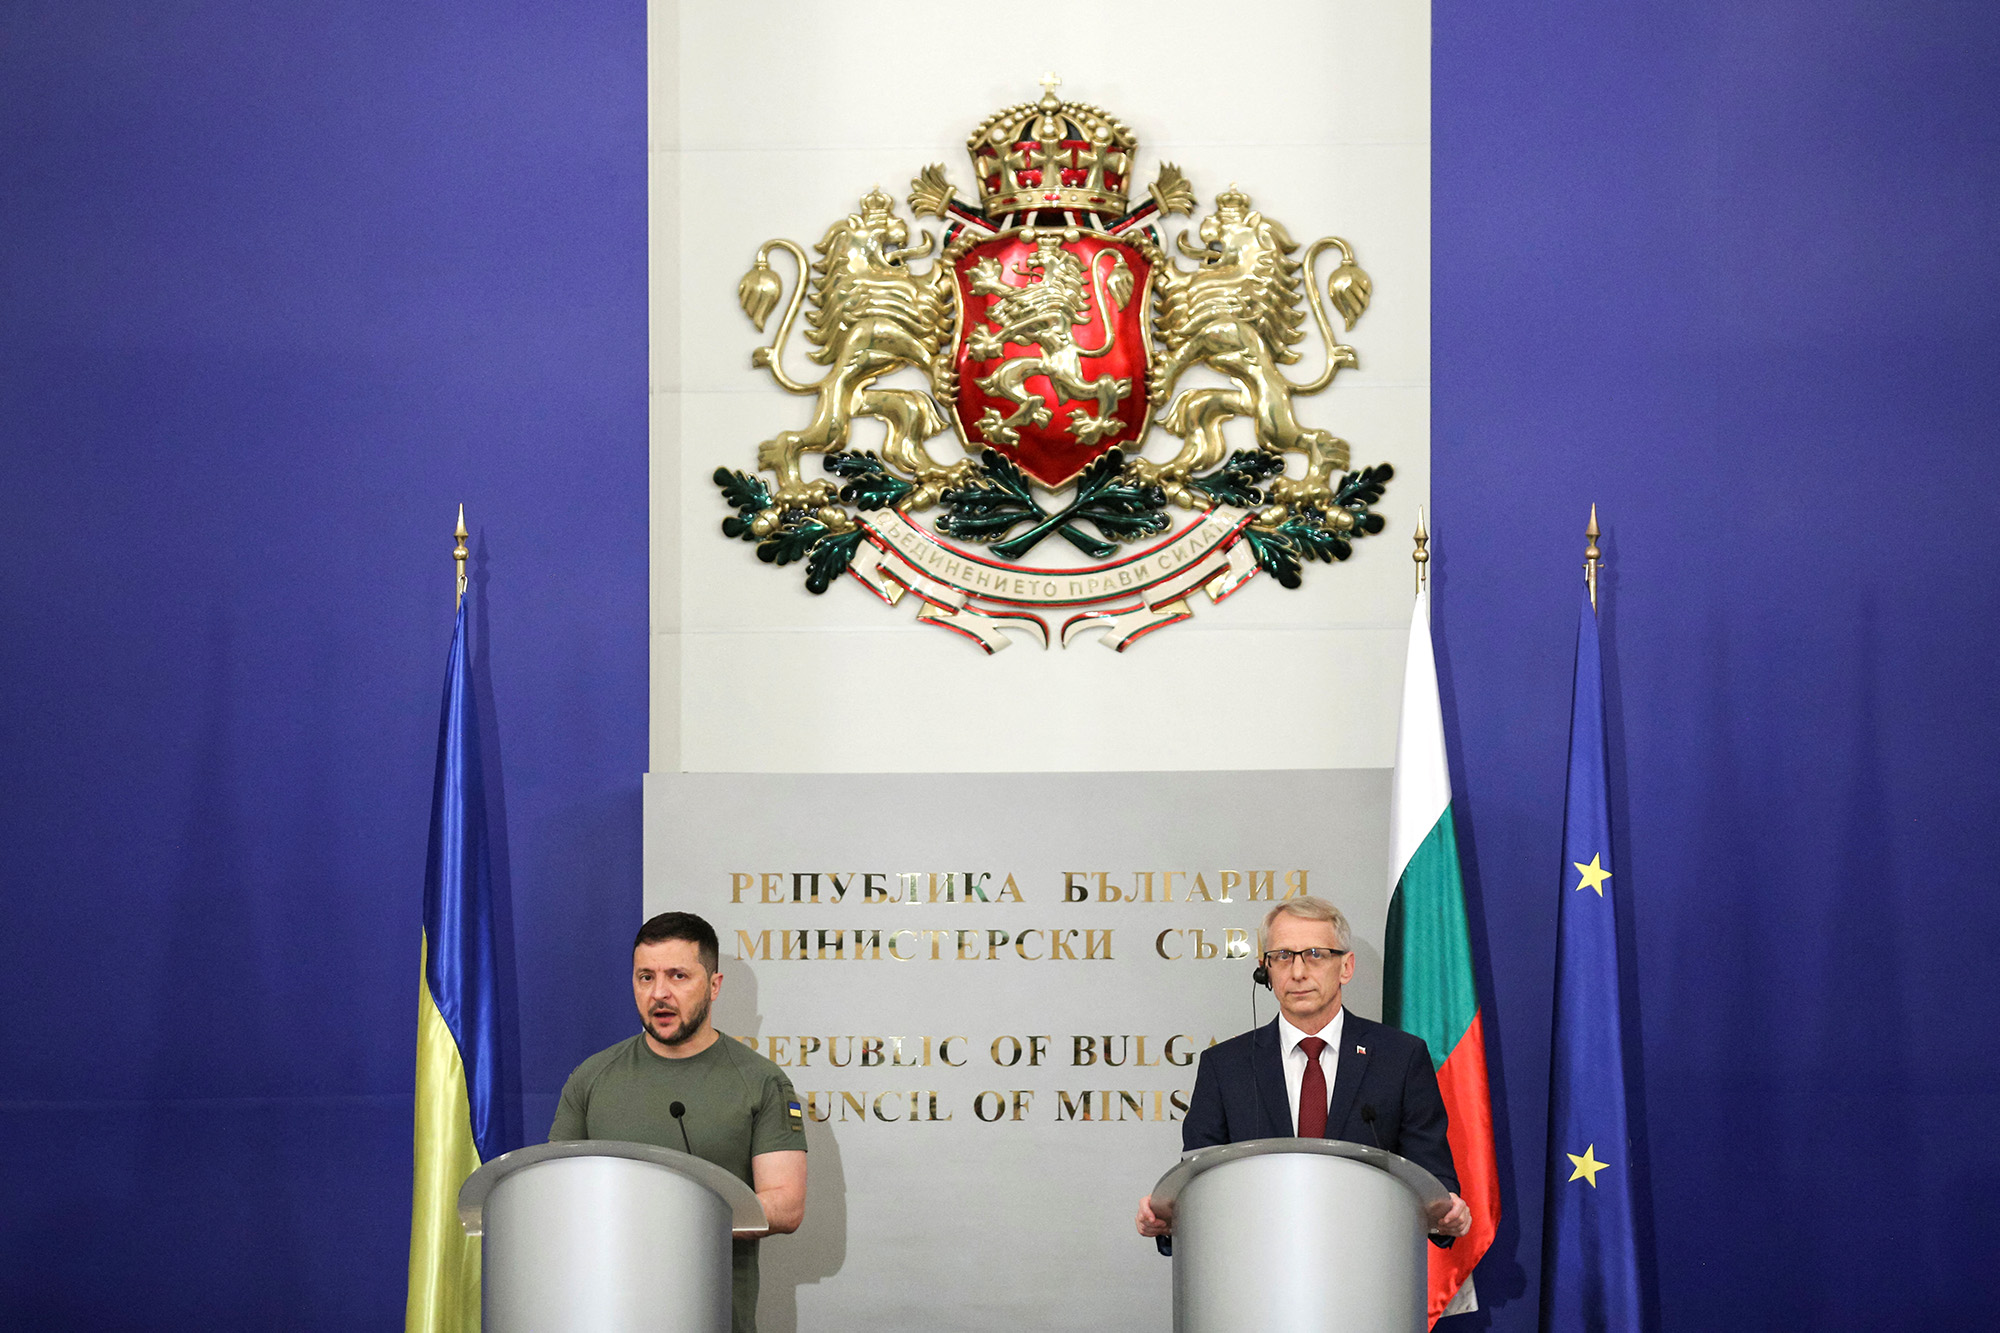 Ukraine's President Volodymyr Zelensky, left, and Bulgarian Prime Minister Nikolai Denkov hold a press conference at the Bulgarian government building in Sofia, Bulgaria, on July 6.